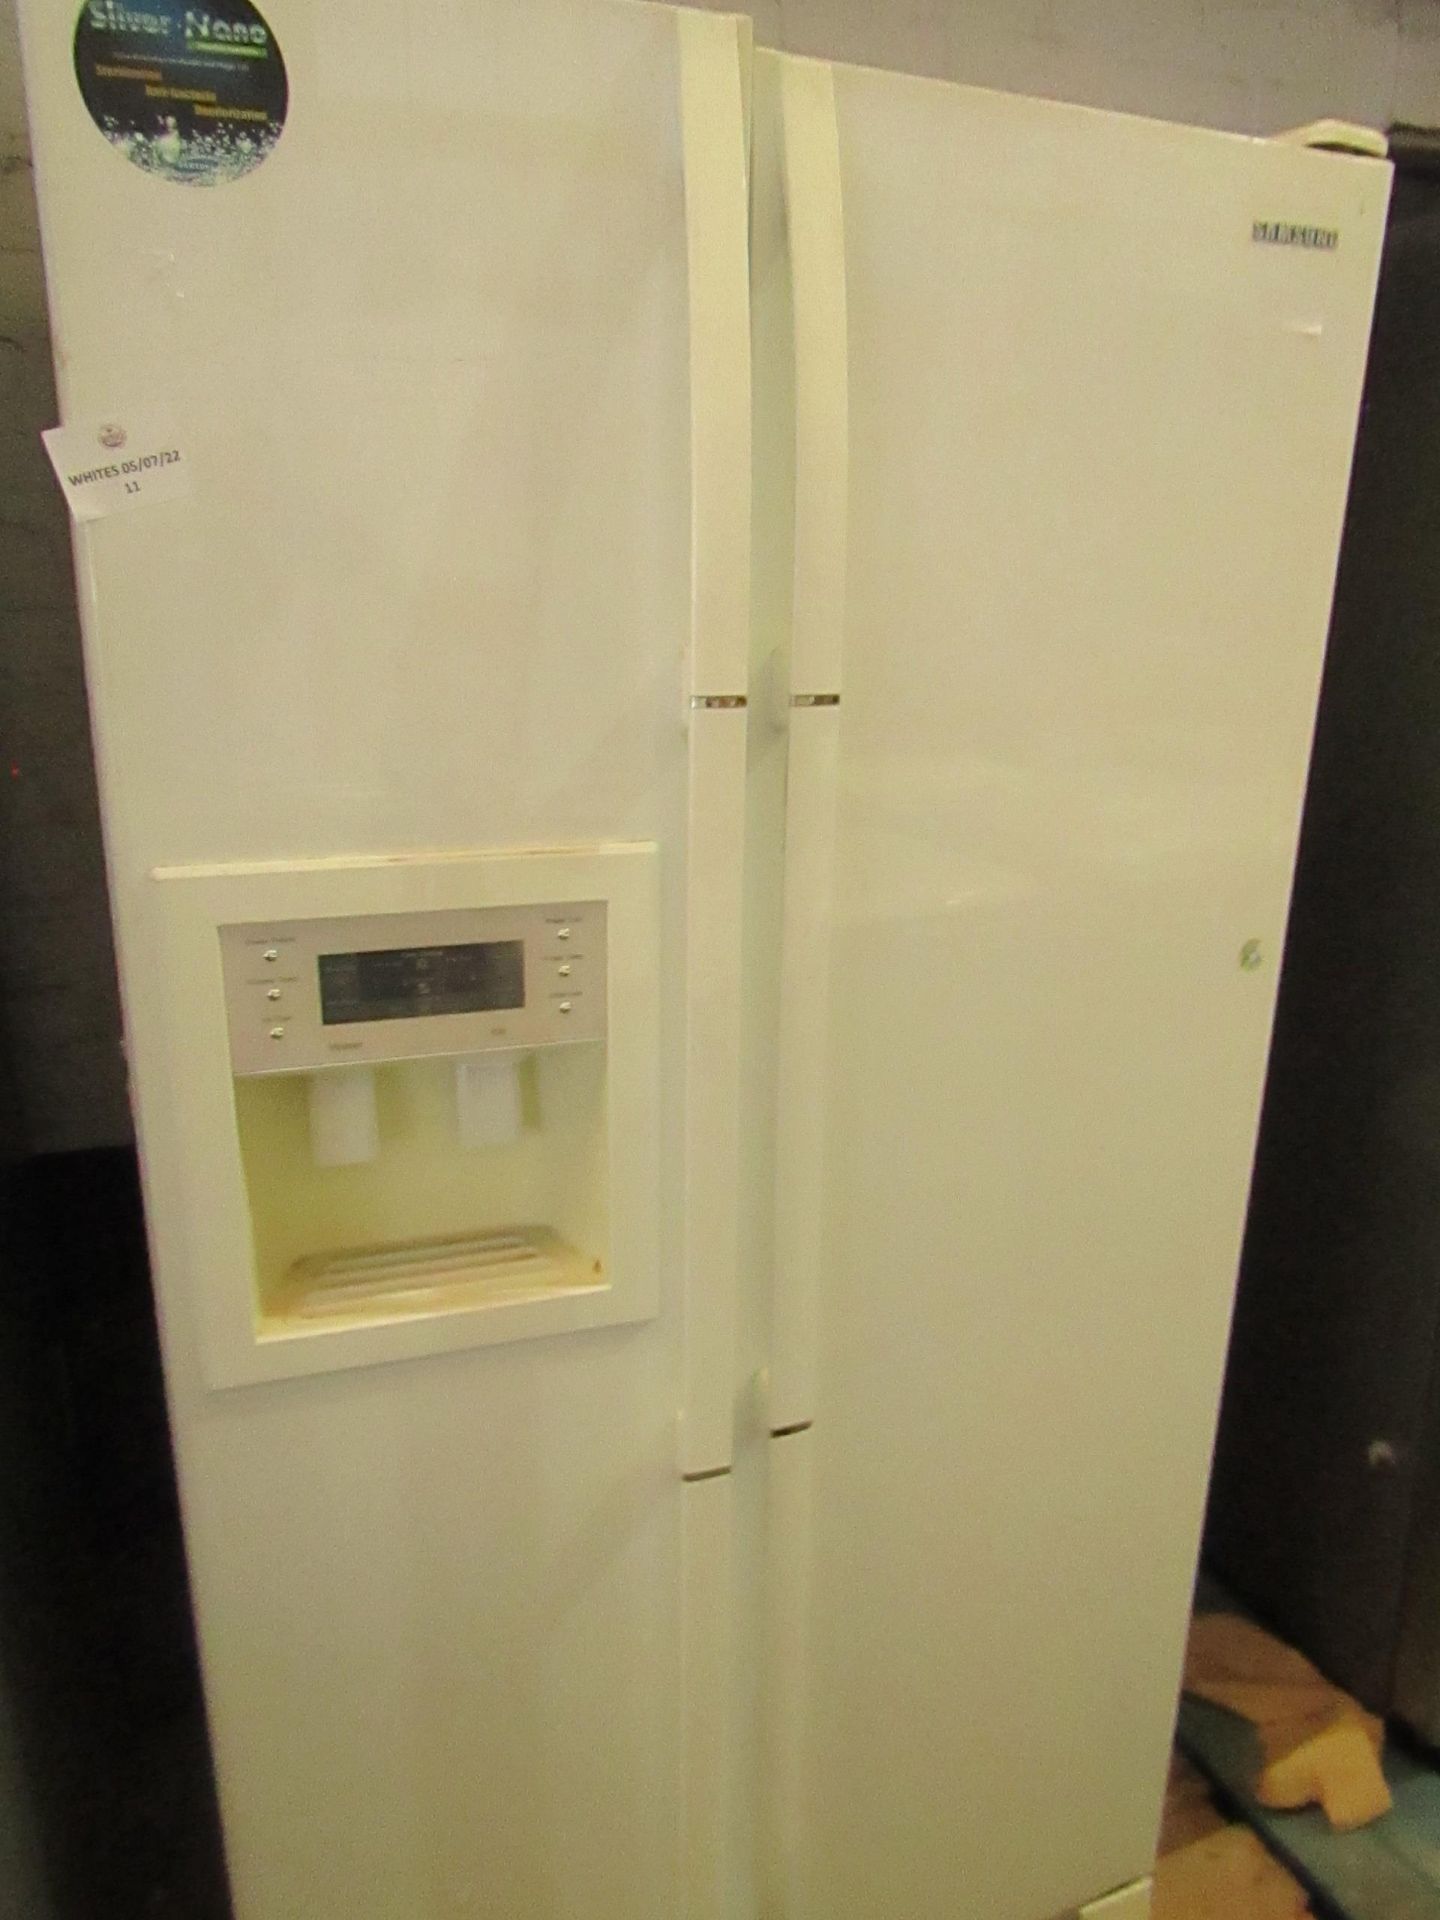 Samsung - American Fridge Freezer - Item Heavily Used Condition & The Plug Has Been Removed, Due